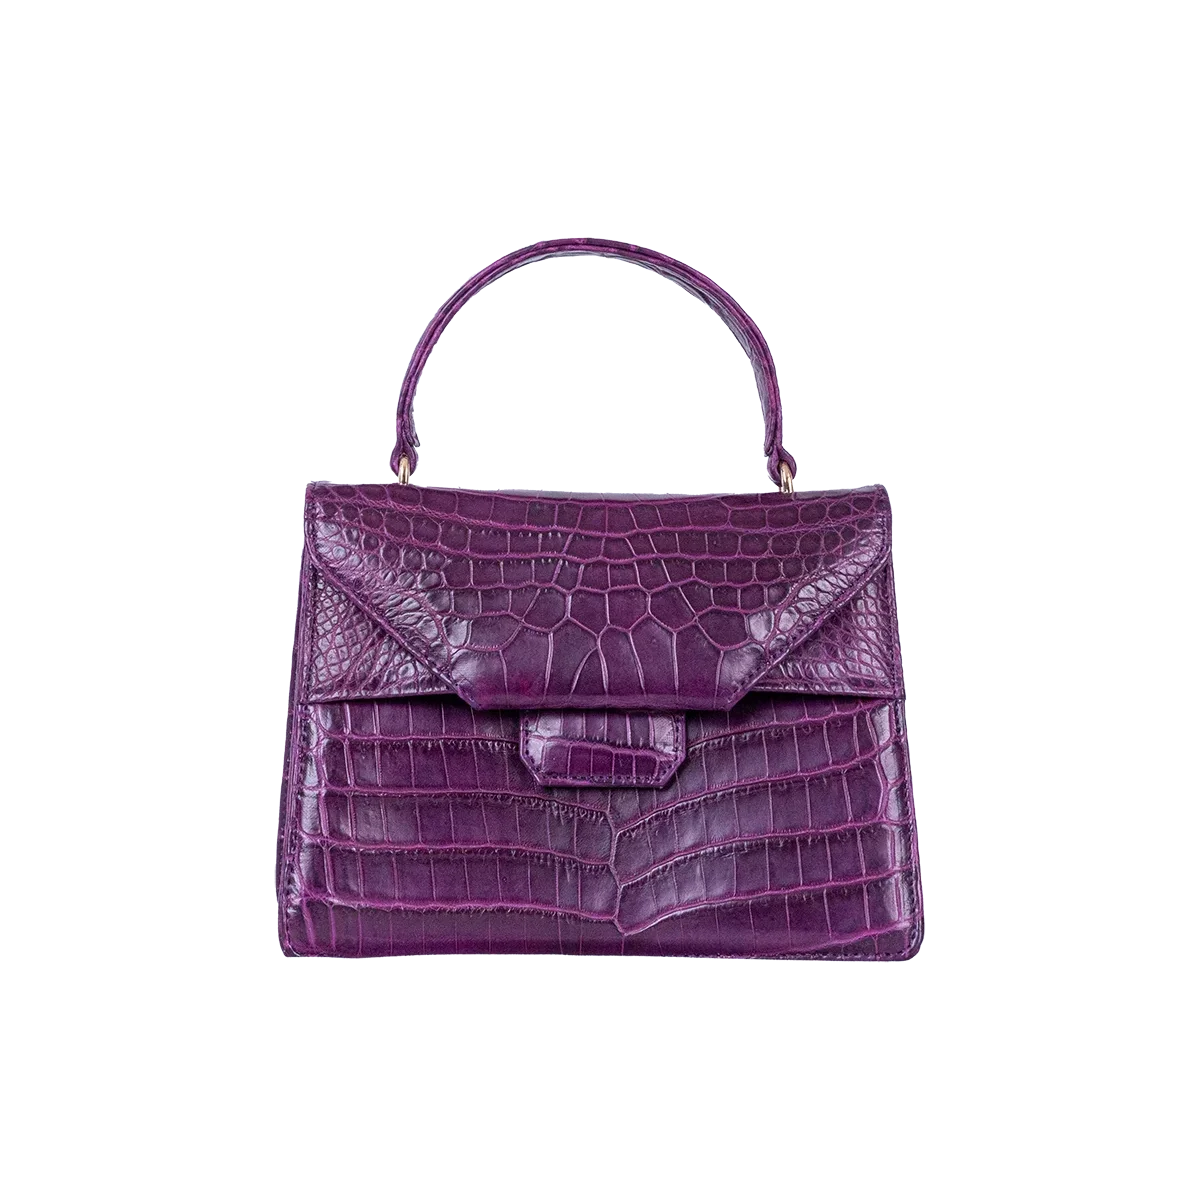 The Petite Betty An in Deep Violet Nile Crocodile - Norton and Hodges